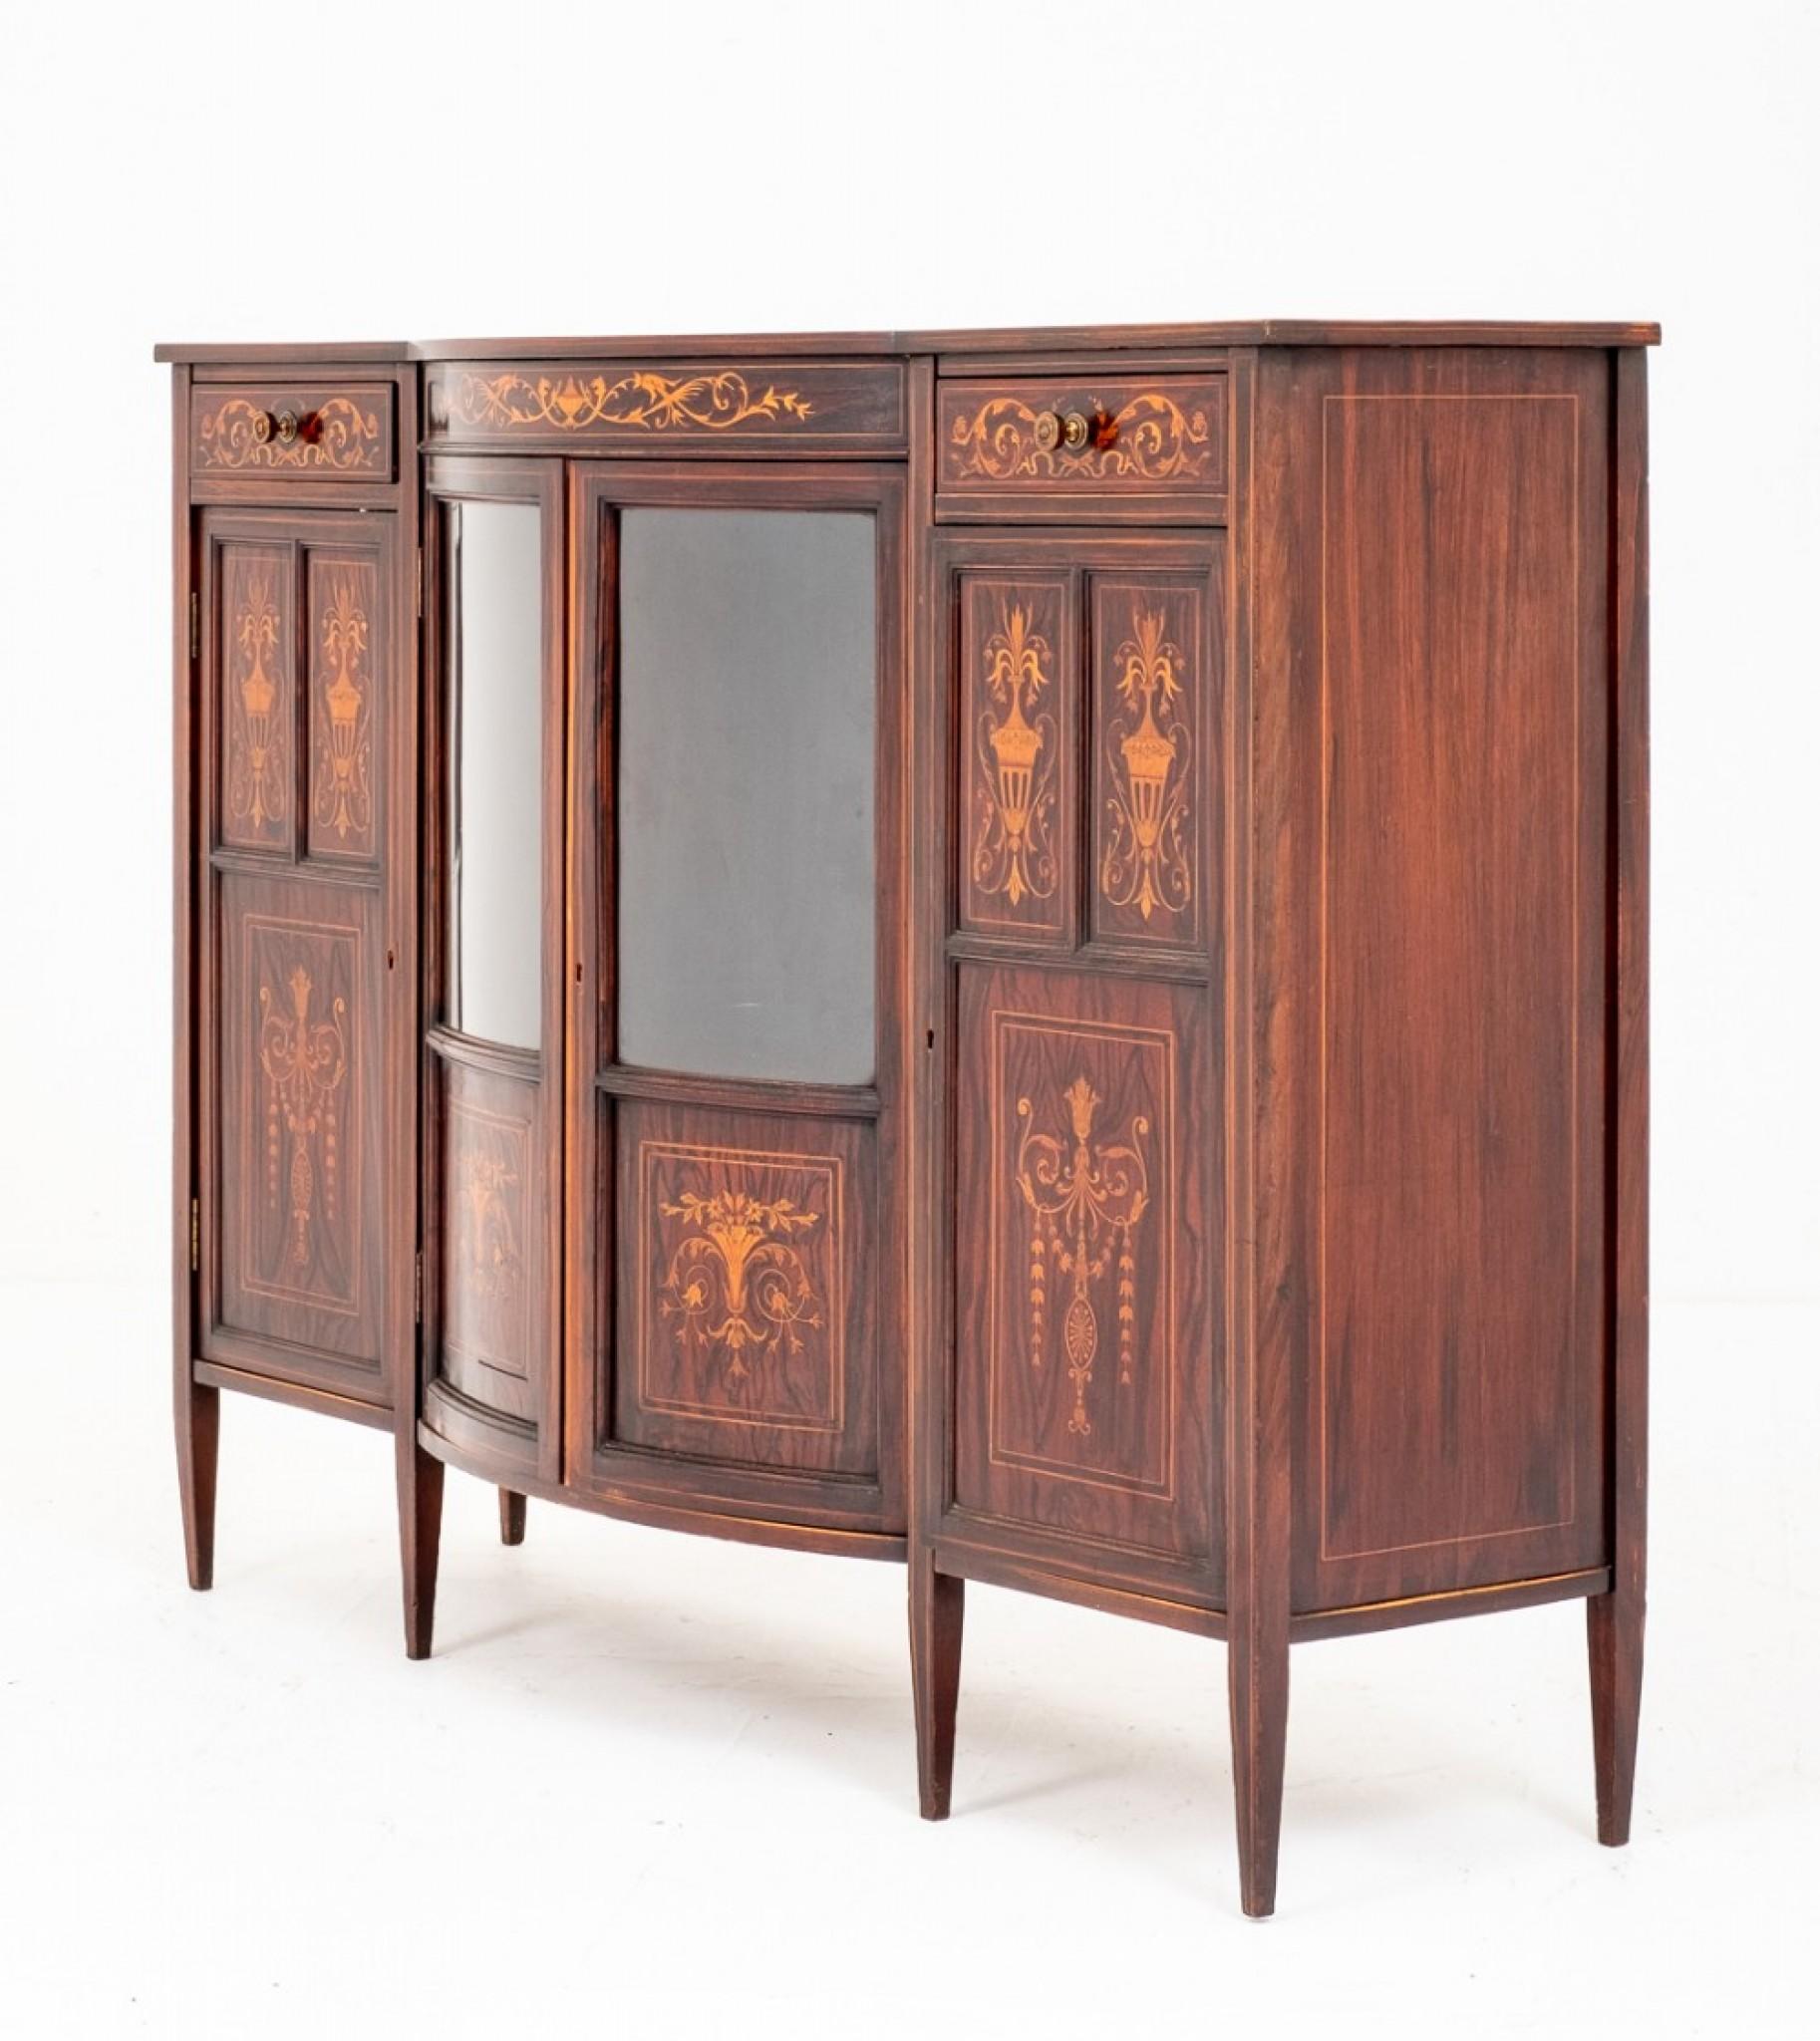 Sheraton Revival-Schrank Sideboard Edwards and Roberts 1880 im Zustand „Gut“ im Angebot in Potters Bar, GB